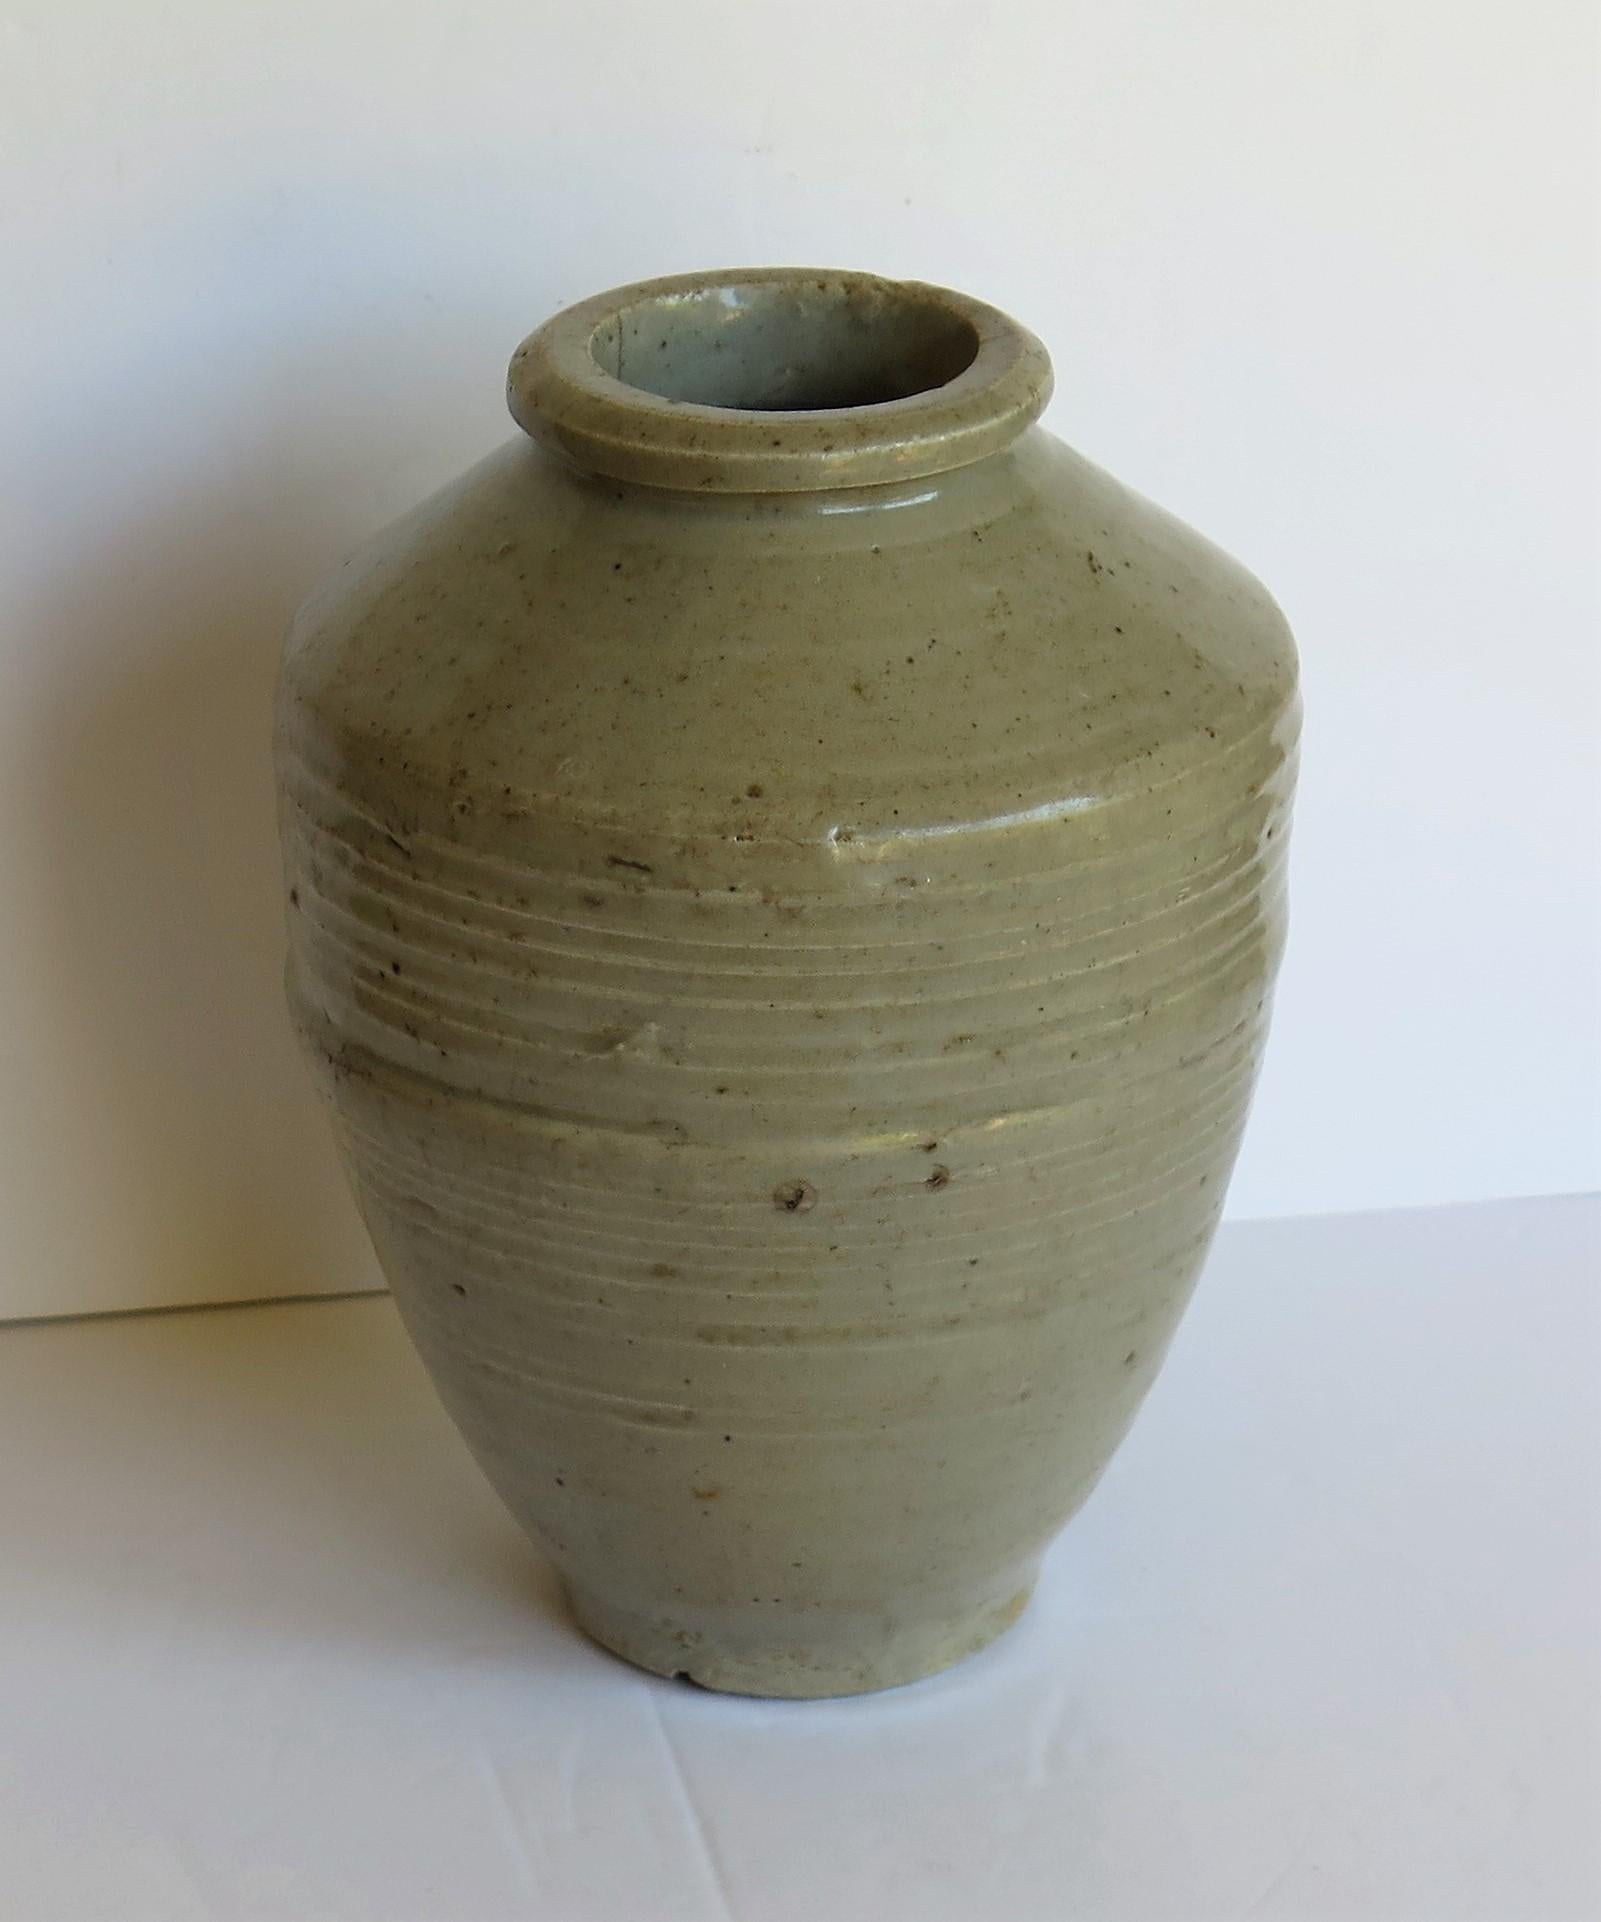 This is a Chinese handcrafted ceramic Yao jar or vase with a Celadon Glaze which we date to the Ming period of the early 17th century or possibly earlier.

The jar is handcrafted, strongly potted with a cylindrical tapering form, high shoulder,